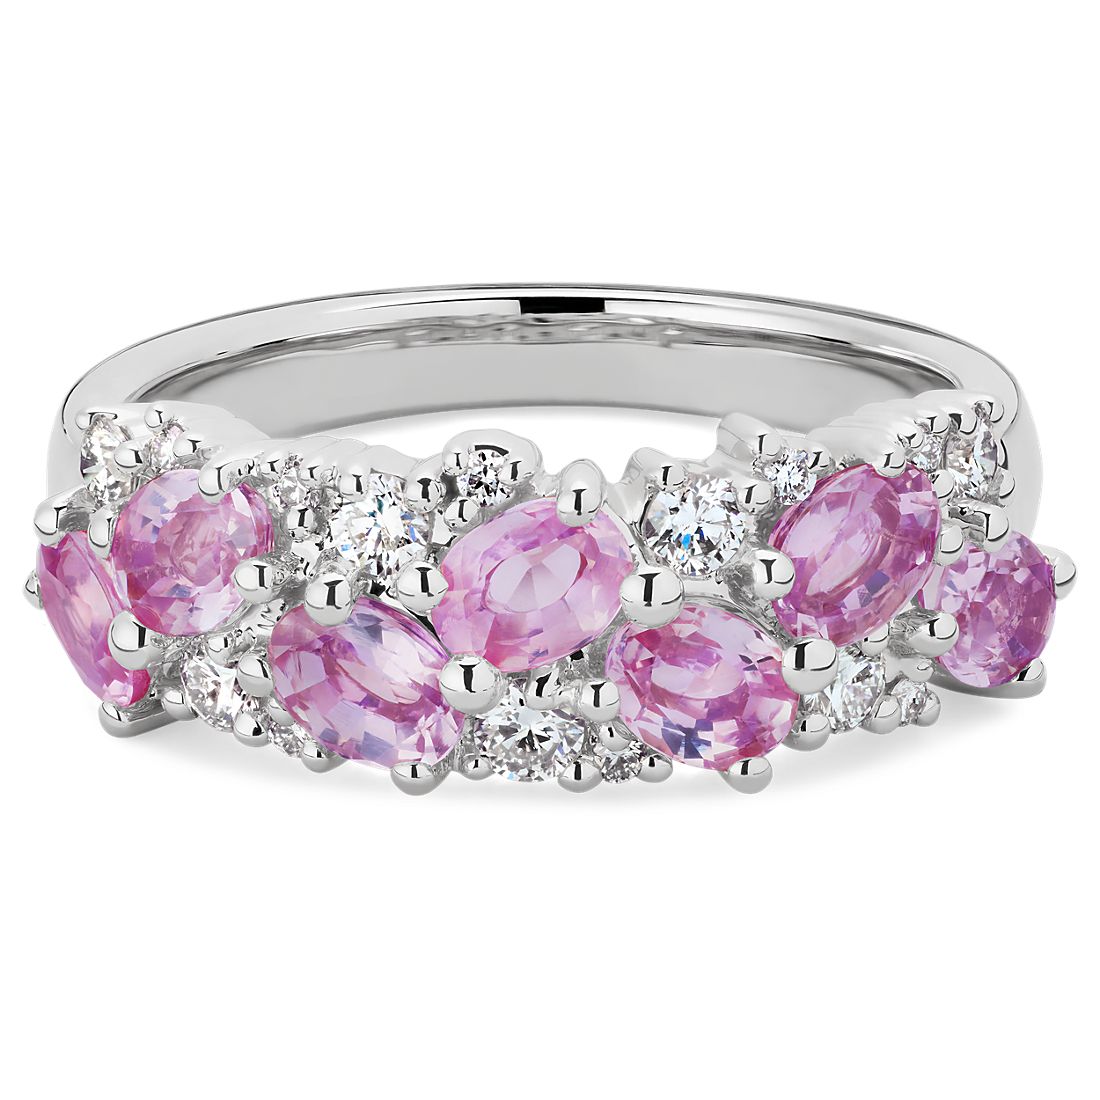 Romantic Oval Pink Sapphire and Diamond Ring in Platinum